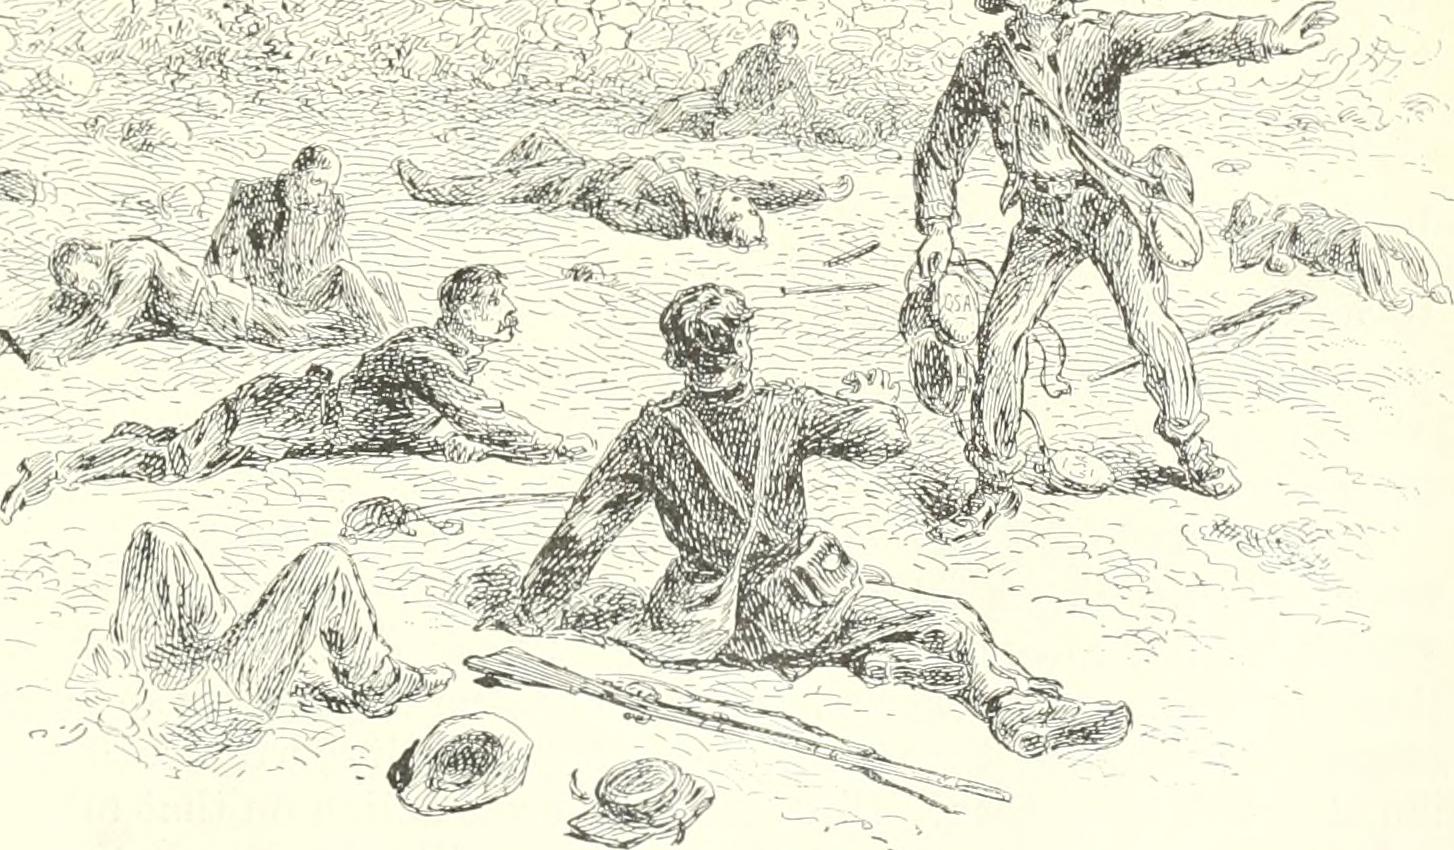 Image from page 306 of "The story of American heroism; thrilling narratives of personal adventures during the great Civil war, as told by the medal winners and roll of honor men" (1897)